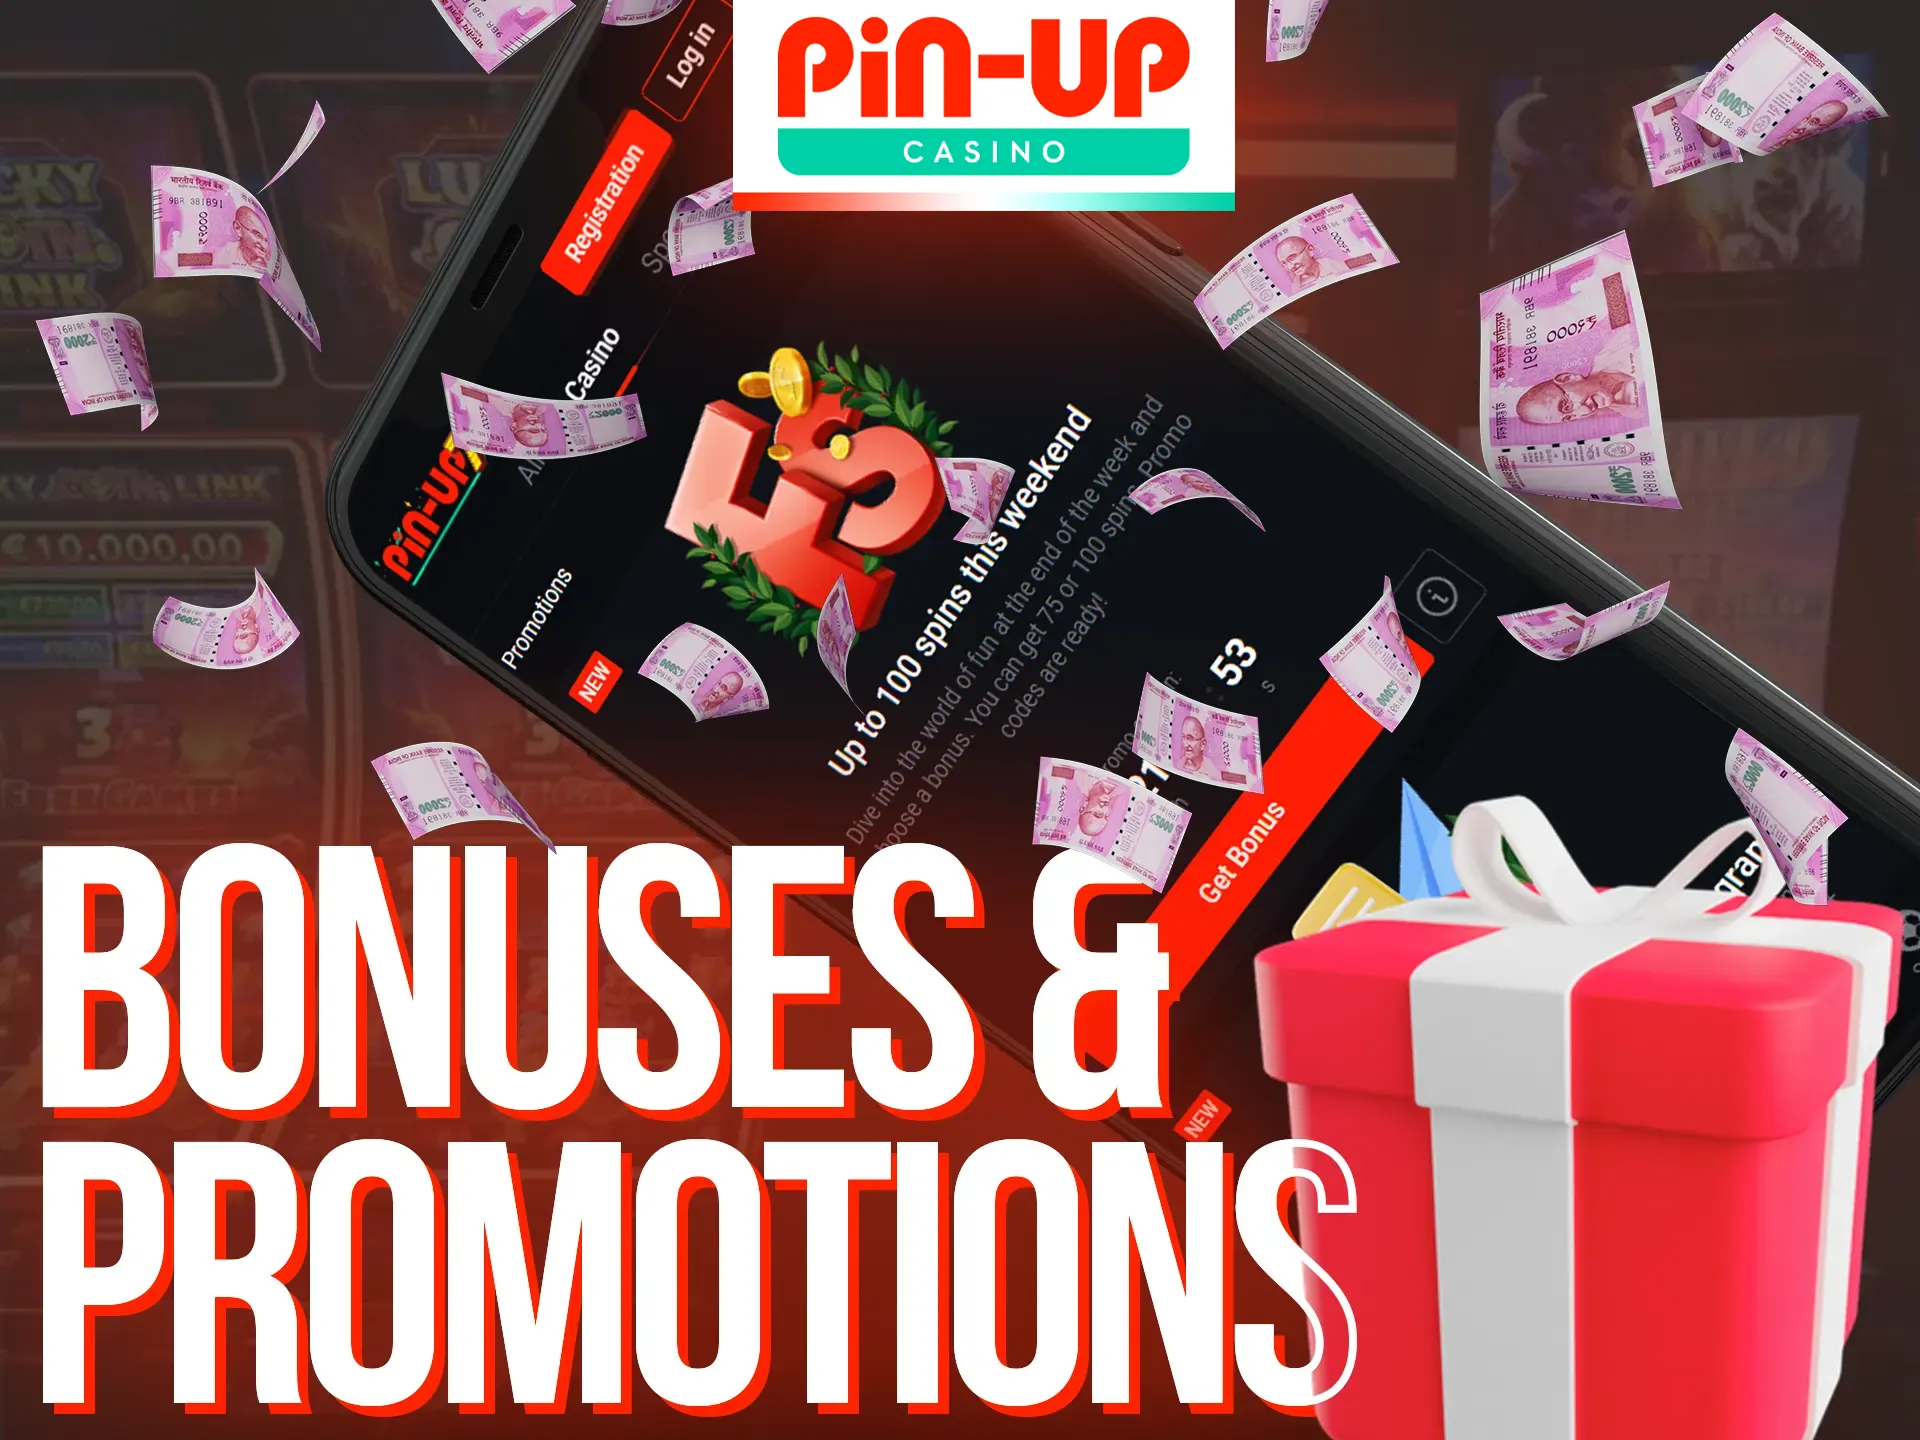 Get bonuses on the Pin-Up mobile app.